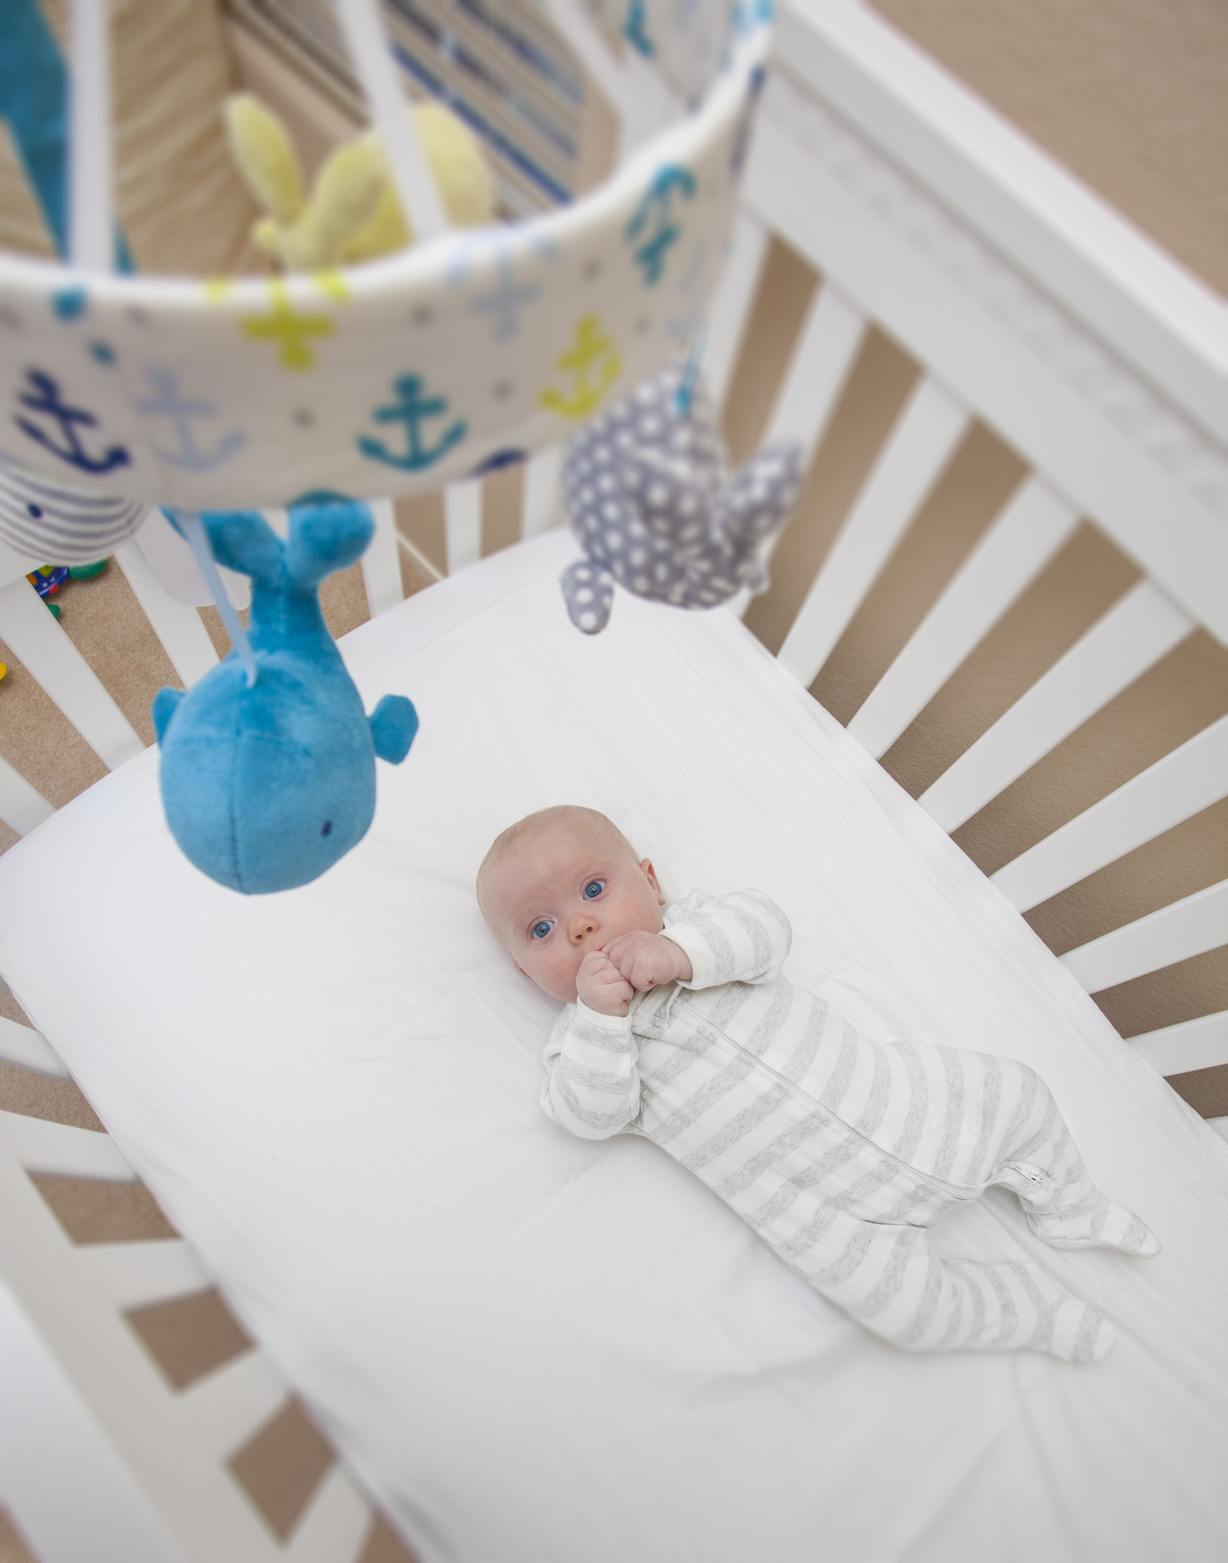 A 3 month old baby boy laying in his crib looking up at a mobile.